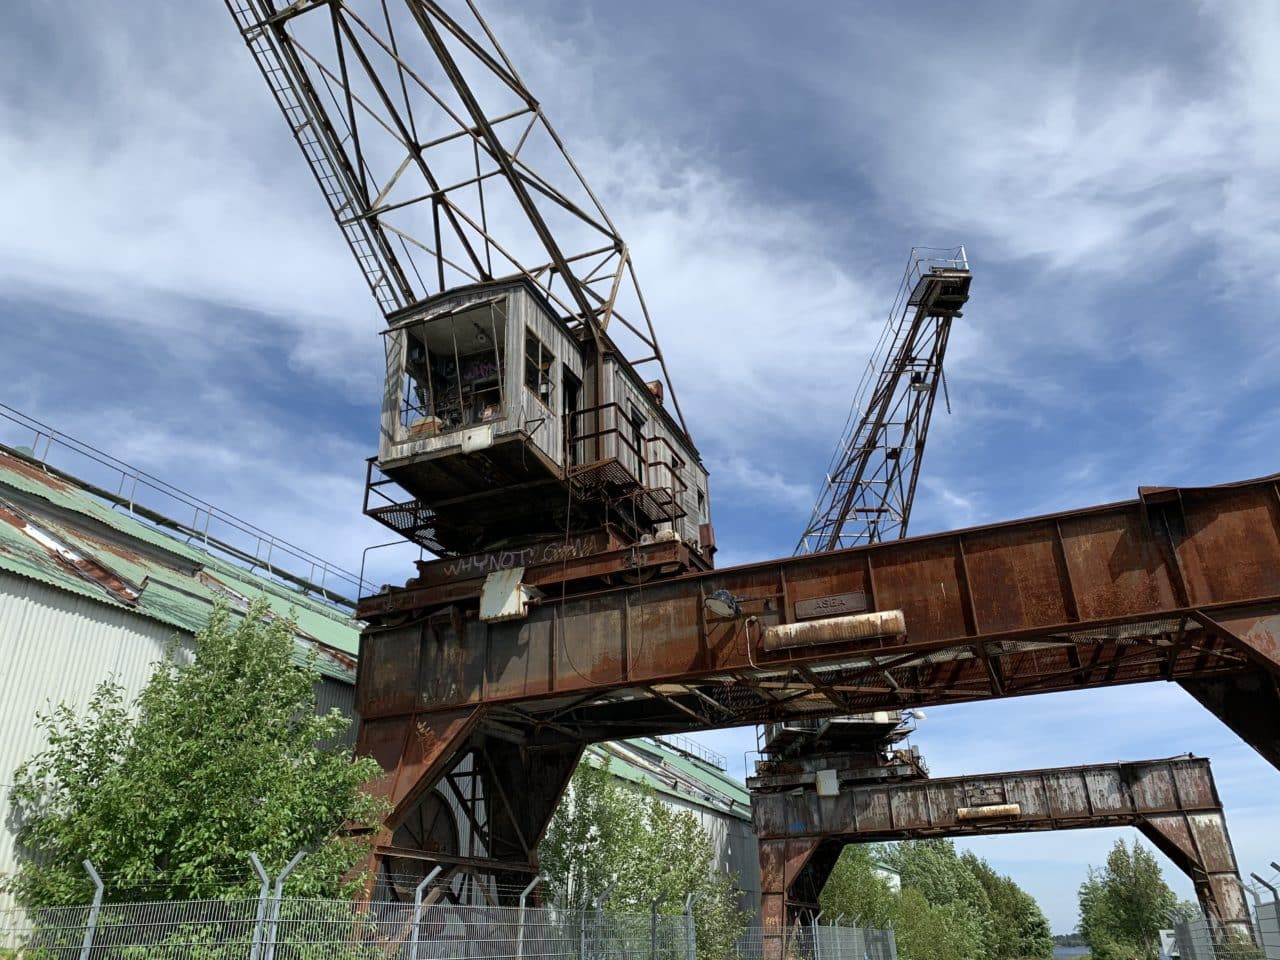 Old And Rusted Harbor Crane